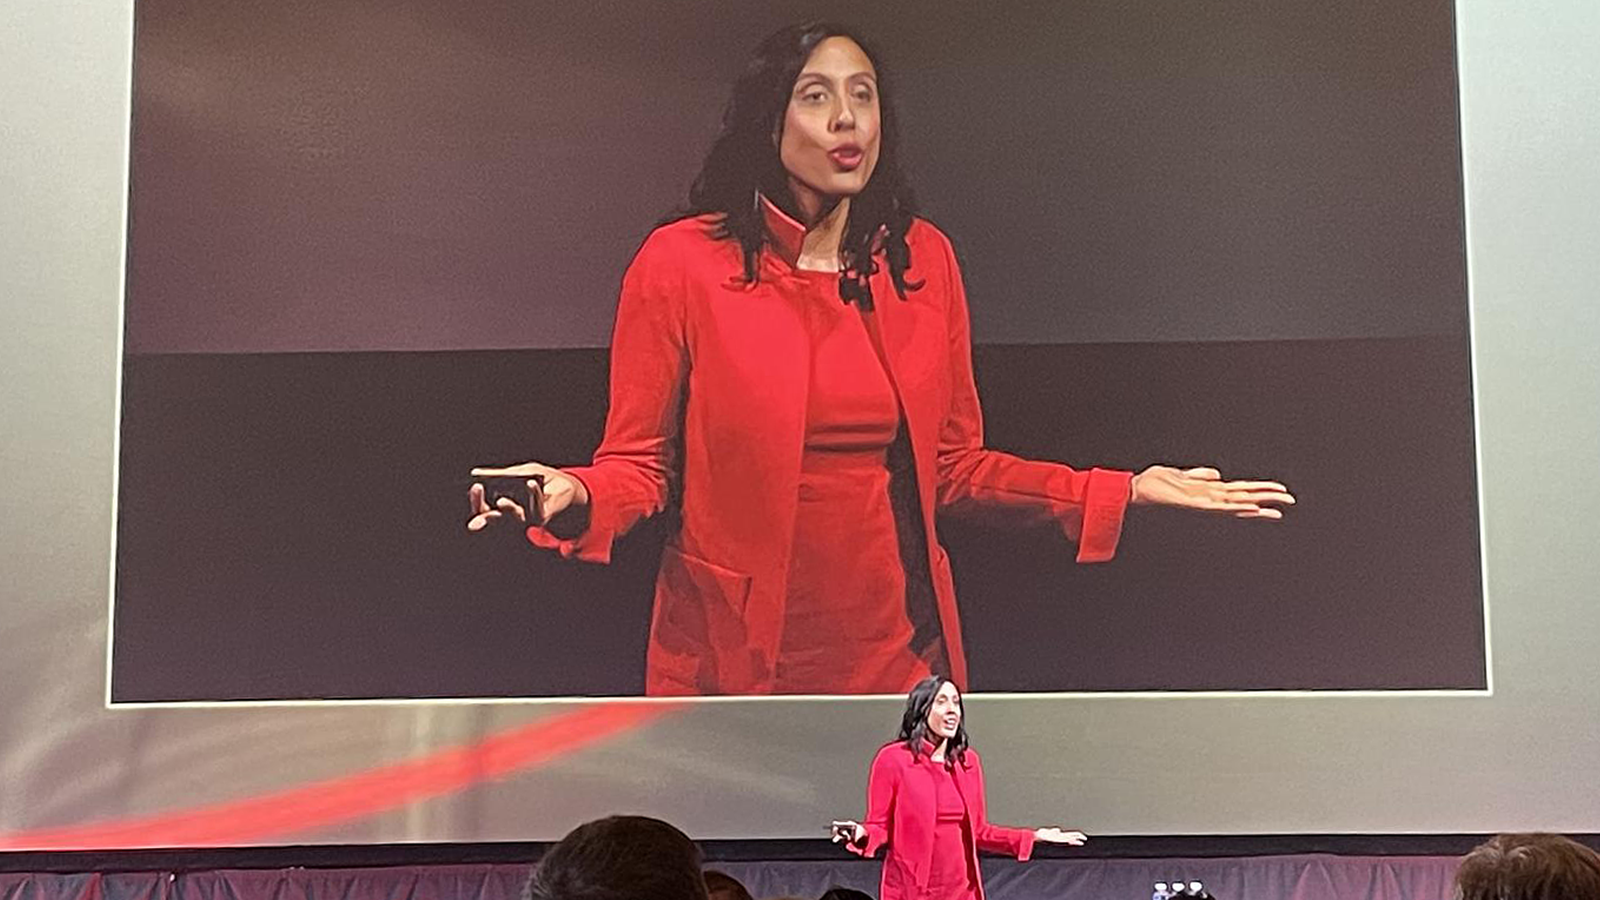 Collaboration expert Erica Dhawan on stage at a CSL meeting